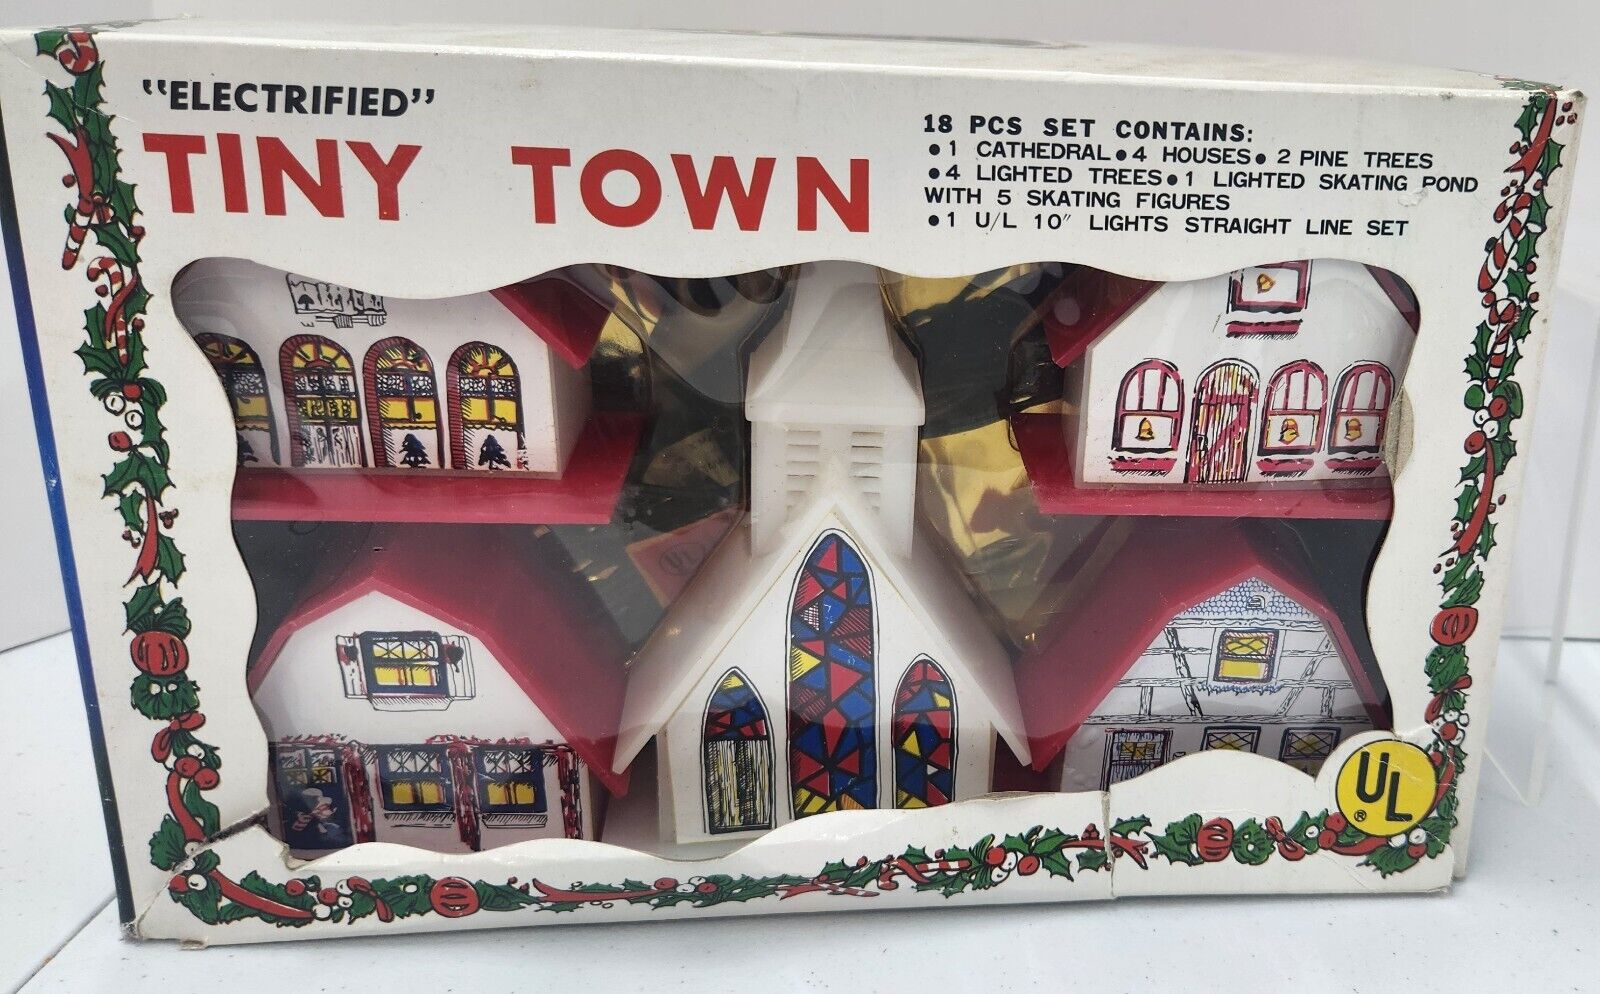 VINTAGE TINY TOWN ELECTRIFIED  HOUSE W/SKATING POND AND FIGURES GOLDEN SLEIGH